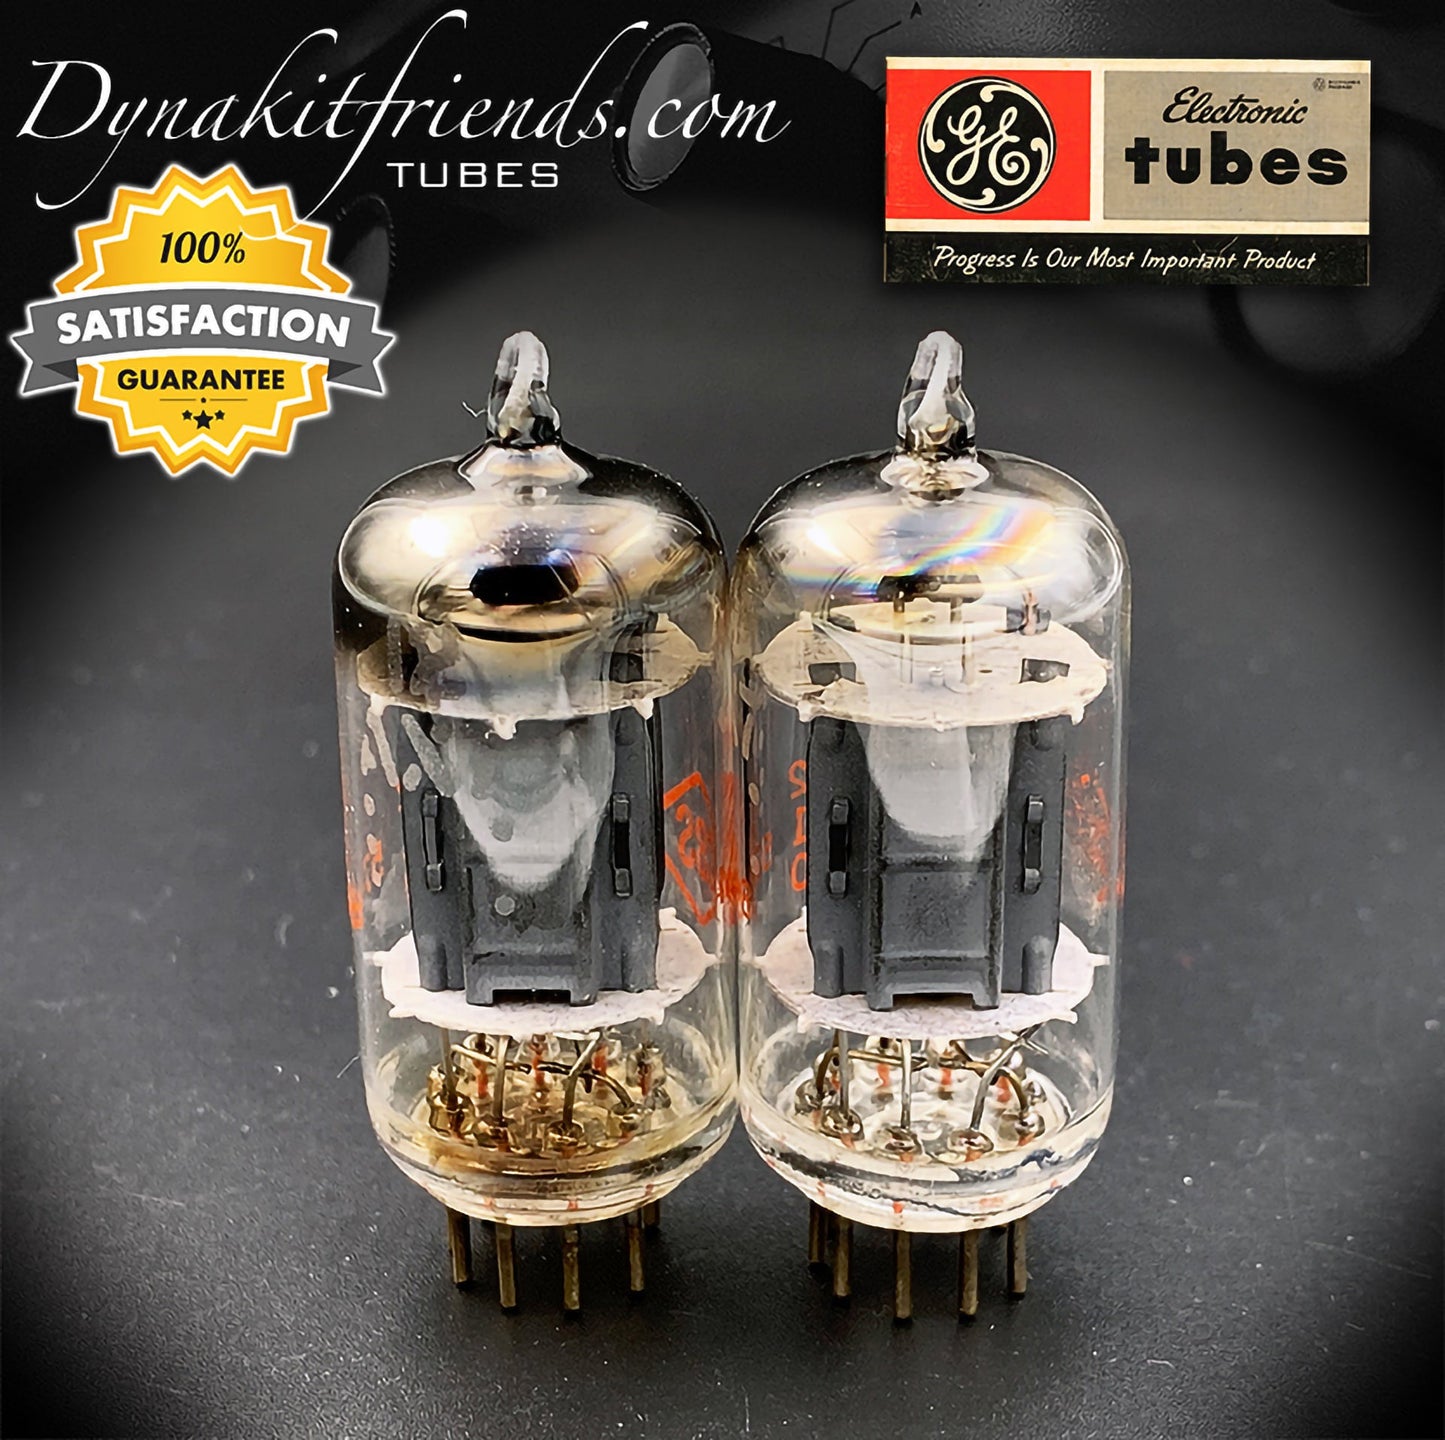 12AX7 ( ECC83 ) GE etichetta CBS Long Gray Plates D Getter Matched Tubes MADE IN USA - Vacuum Tubes Treasures